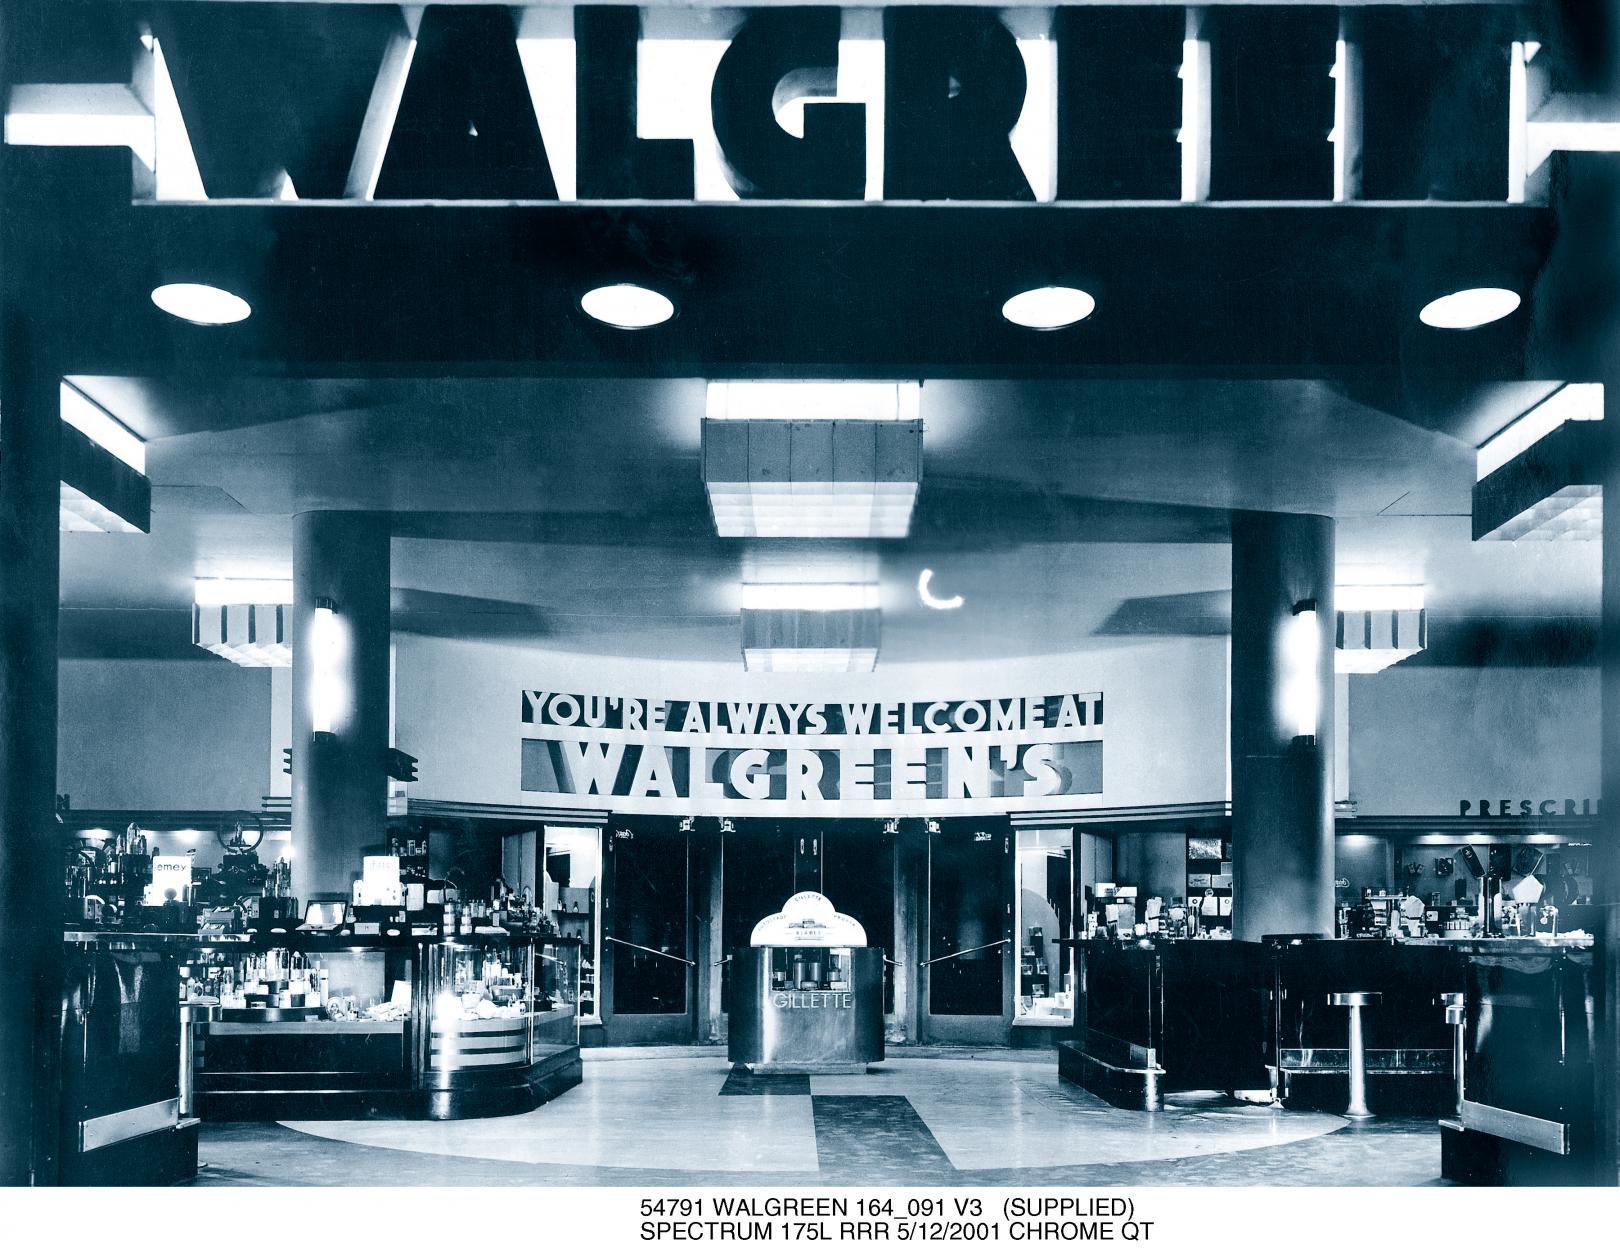 1934: Walgreens stock is listed on the New York Stock Exchange